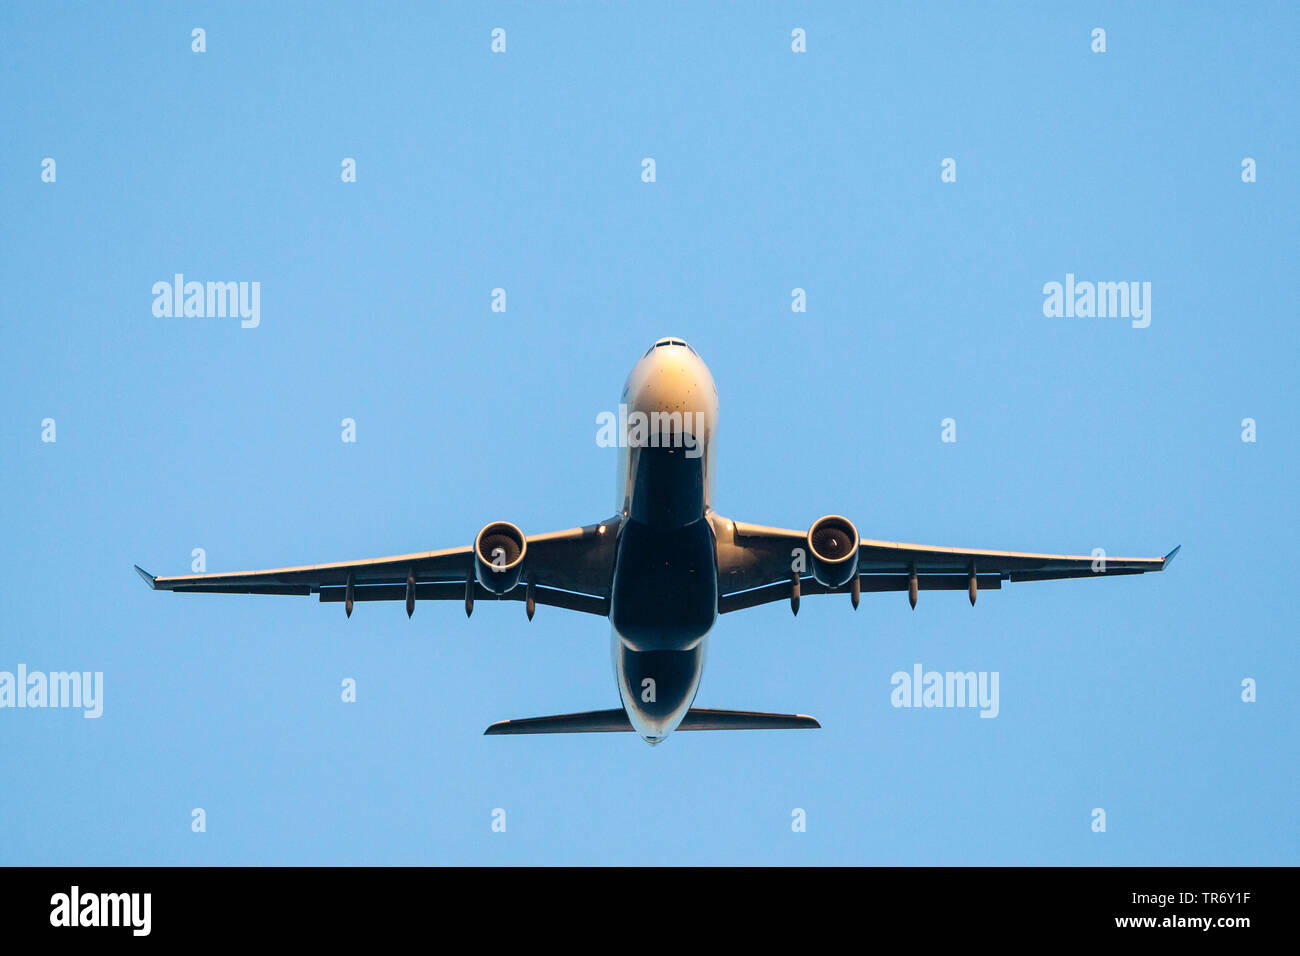 Airplane flying in cloudless sky, Netherlands, Northern Netherlands Stock Photo